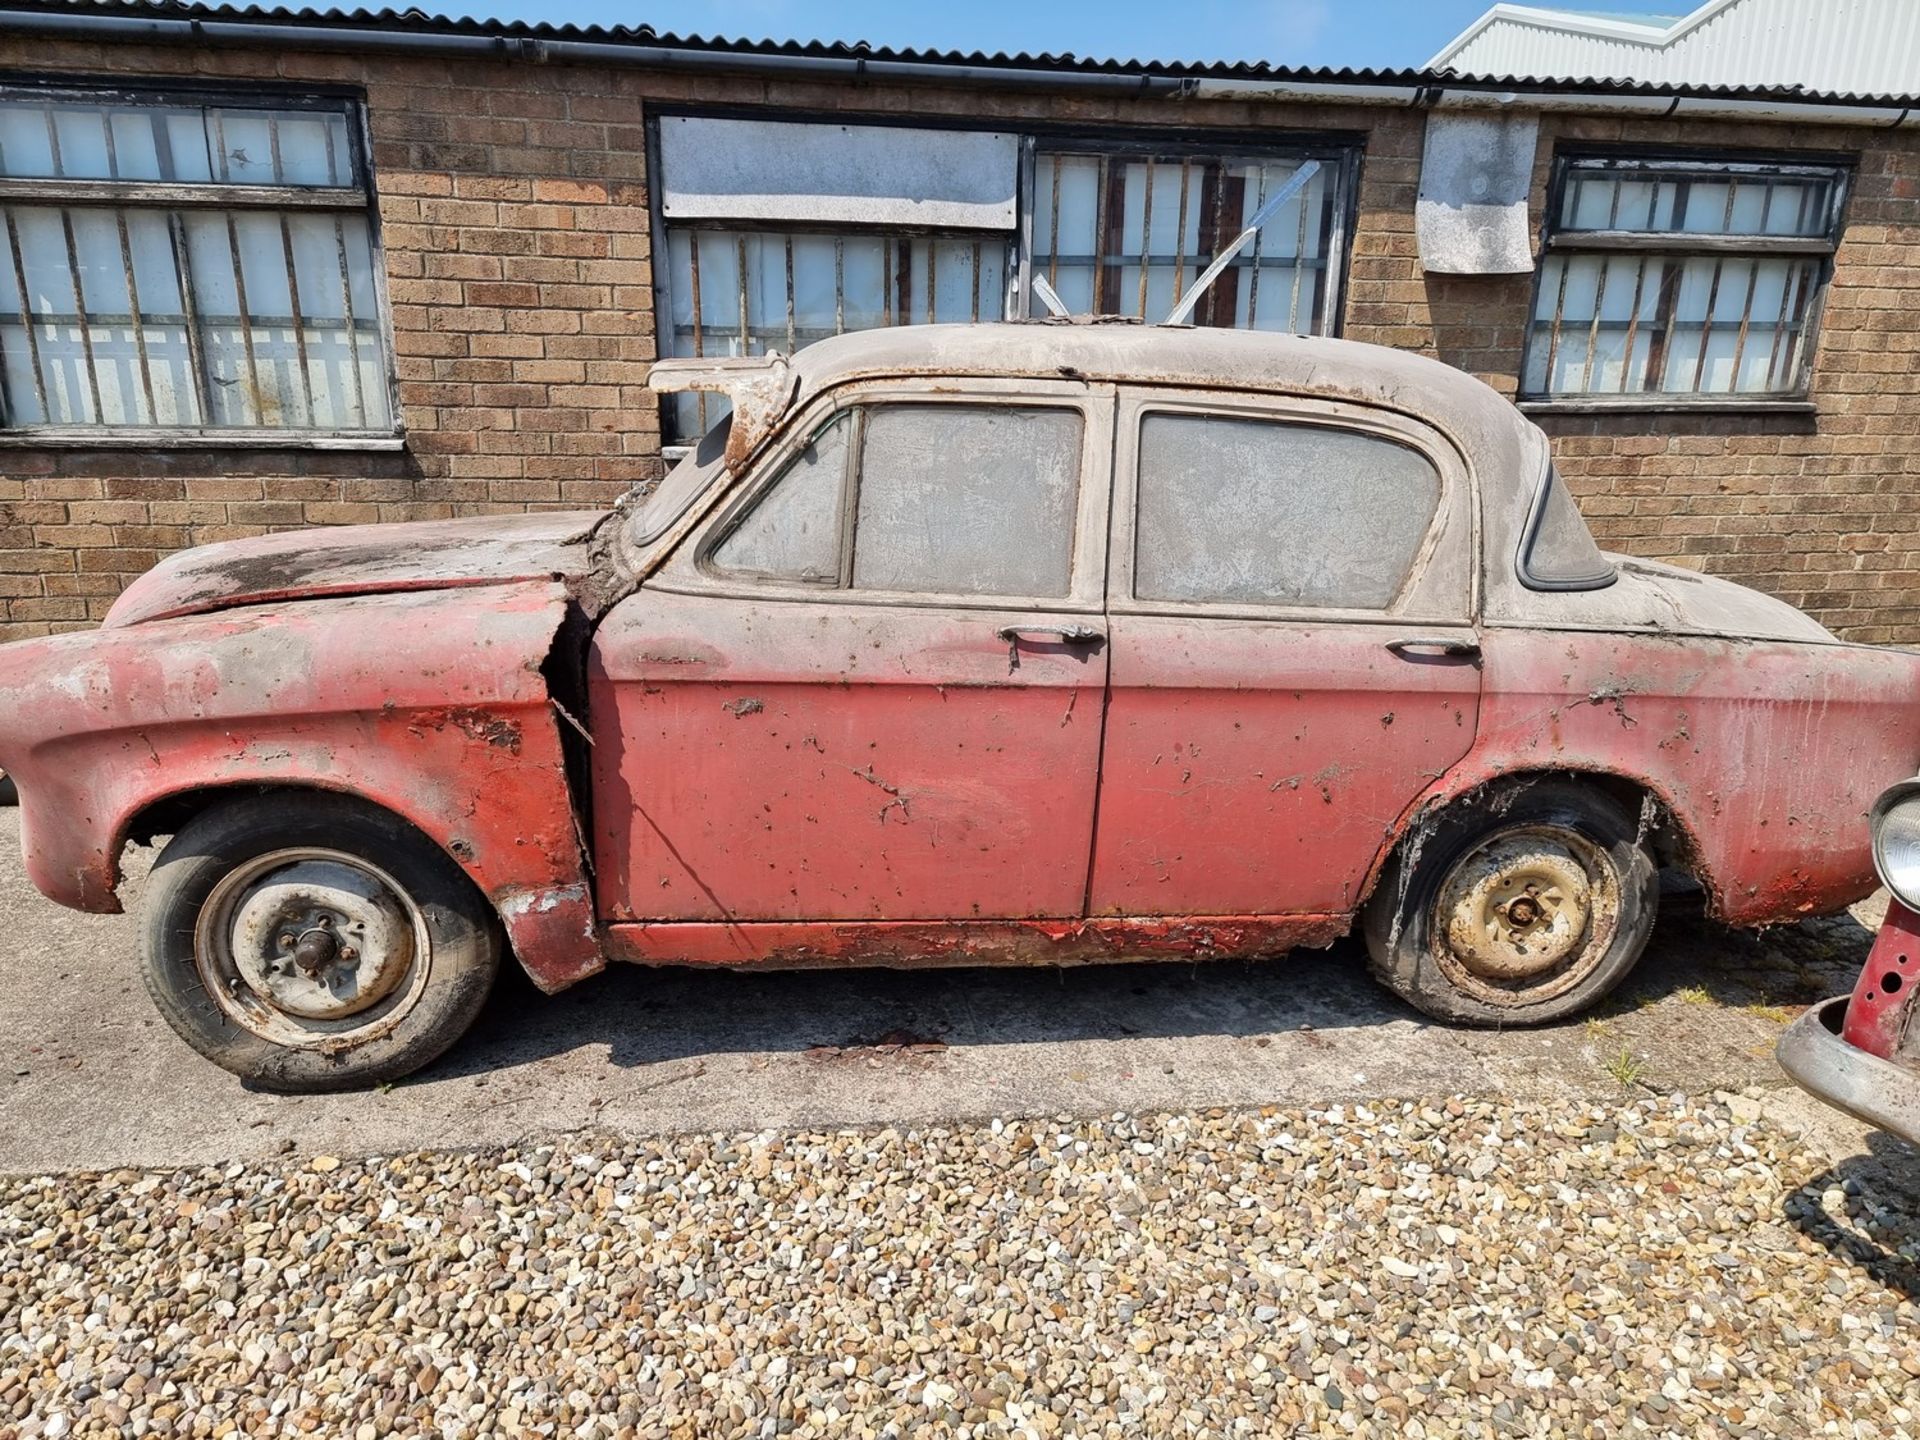 1958 Hillman Minx Series II Project, 1390cc. Registration number HXG 46. Chassis number A1821010H. - Image 3 of 10